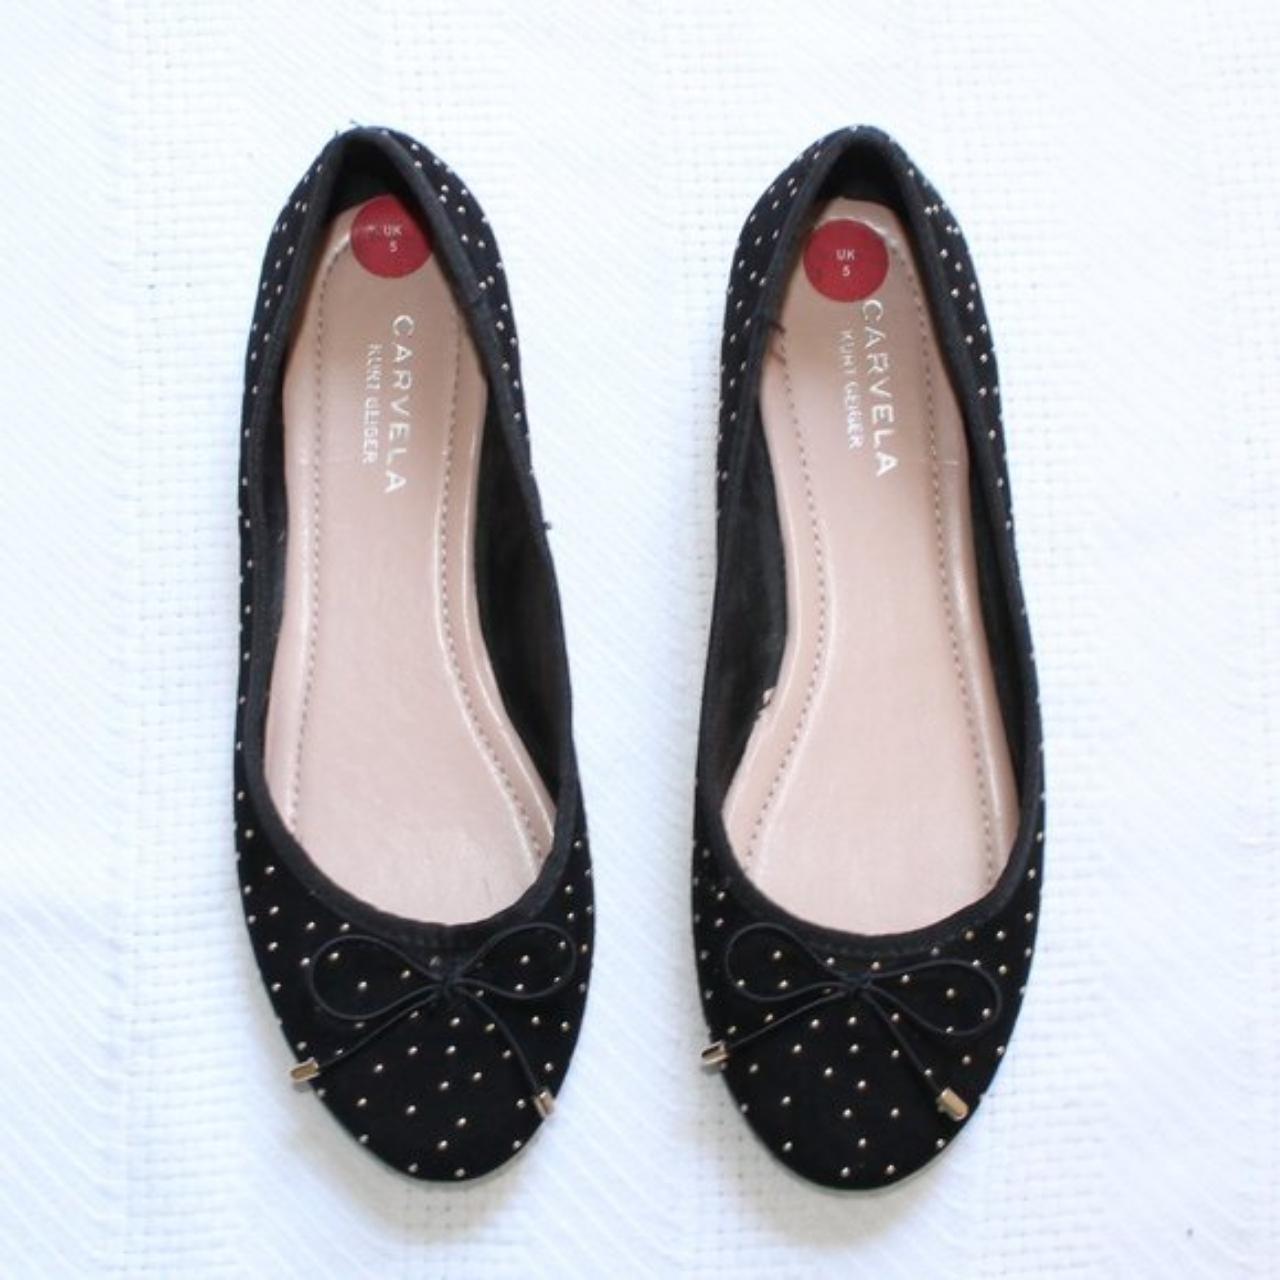 Product Image 1 - Outer Material: Fabric
Inner Material: Manmade
Sole: